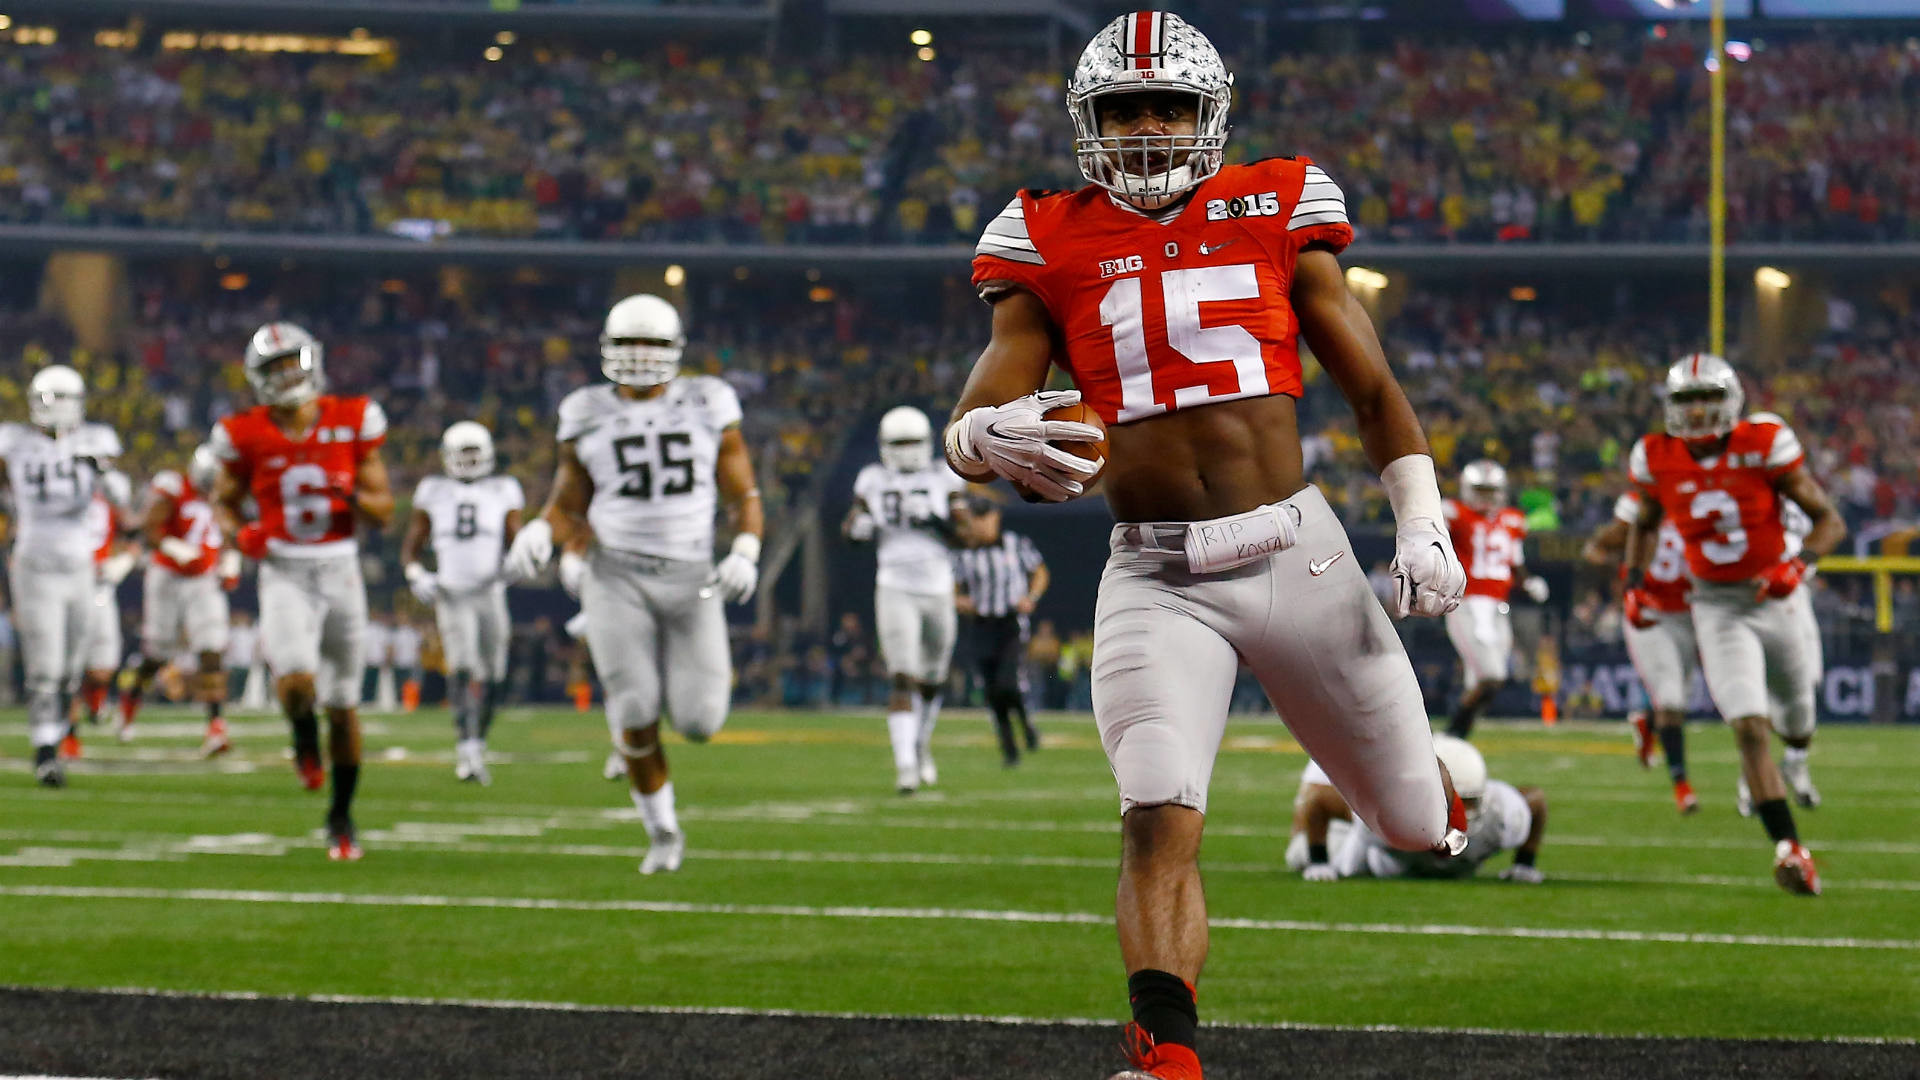 1920x1080 Ohio State Buckeyes Make College Football Playoff Their Own The 